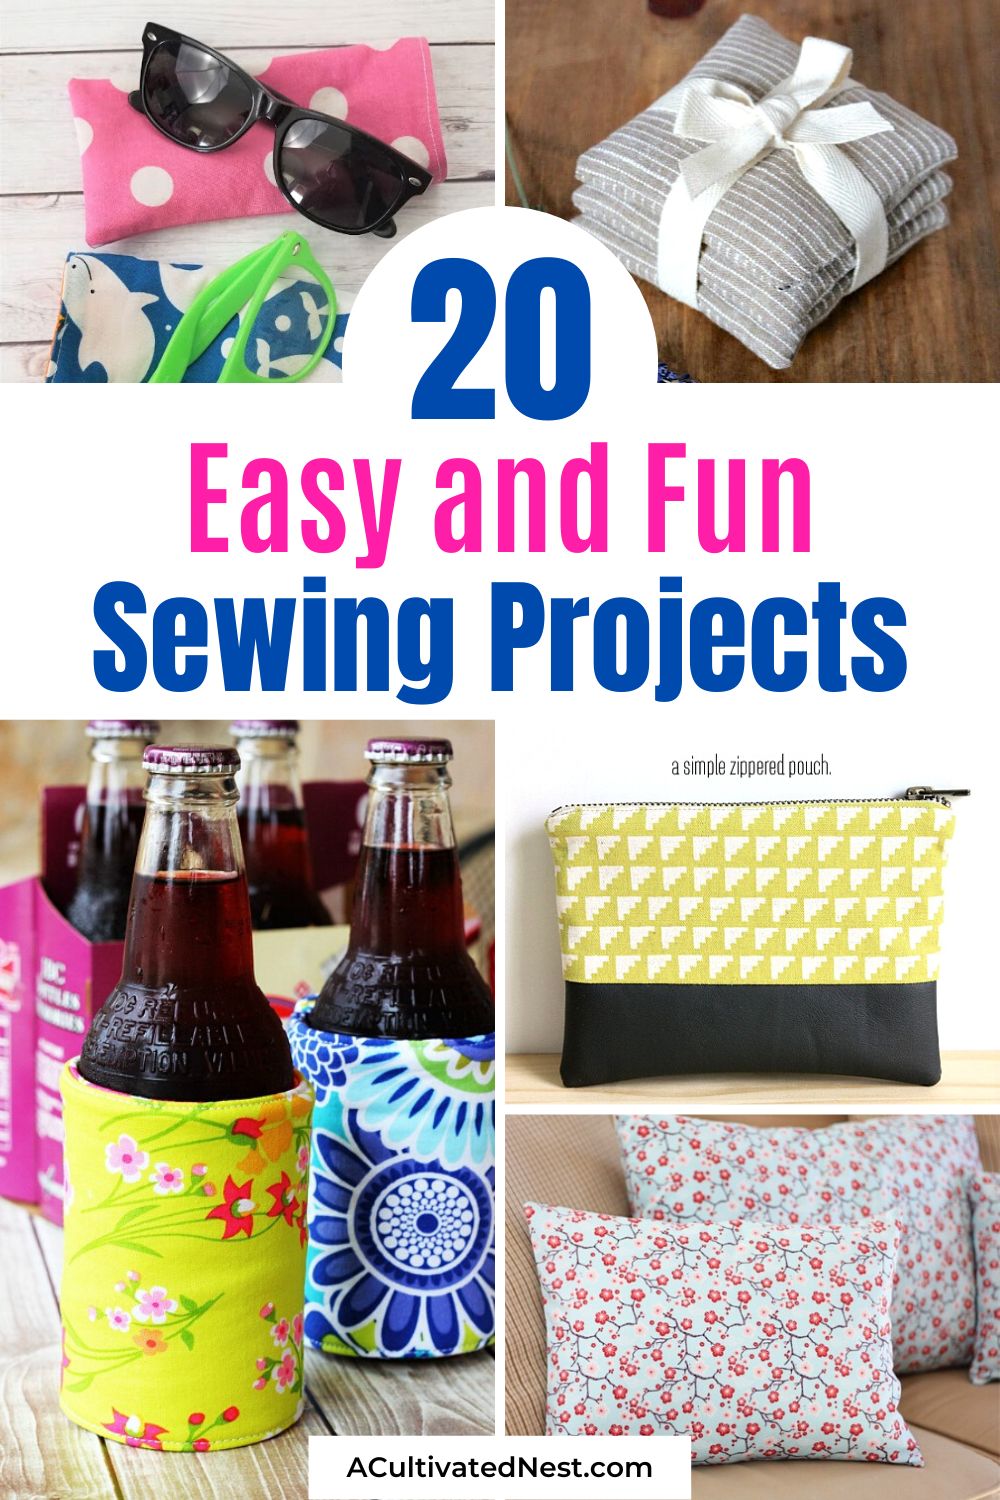 20 More Easy Sewing Projects for Beginners- Sewing isn't so scary if you have the right tutorials! If you've ever wanted to sew your own clothes, décor, or gifts but not known how to start, then you'll love these easy sewing projects for beginners! | #sewingProjects #sewing #beginnerSewing #DIY #AcultivatedNest